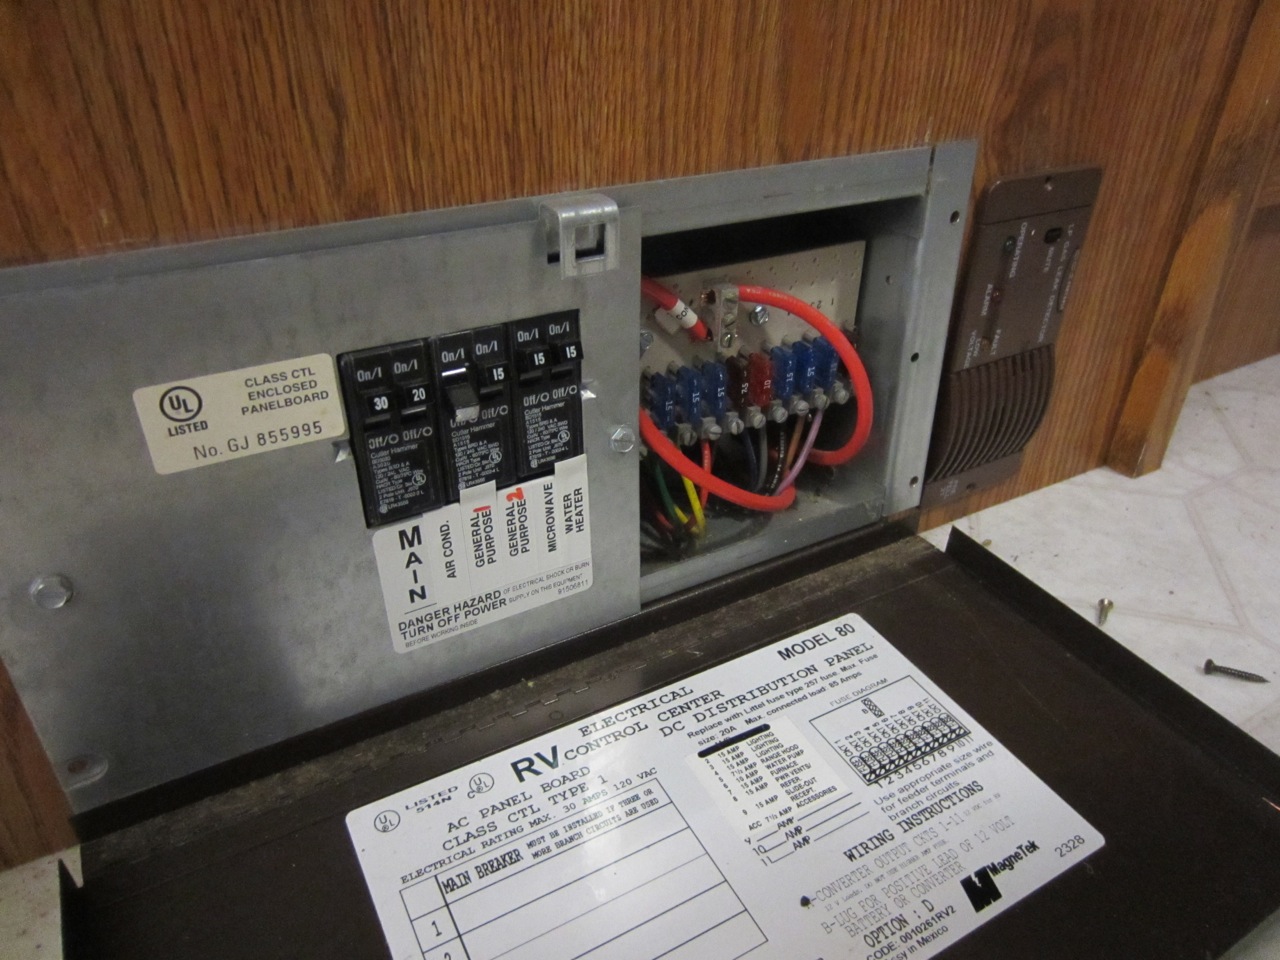  Removed the AC/DC distribution panel (shown), DC converter and battery charger. 